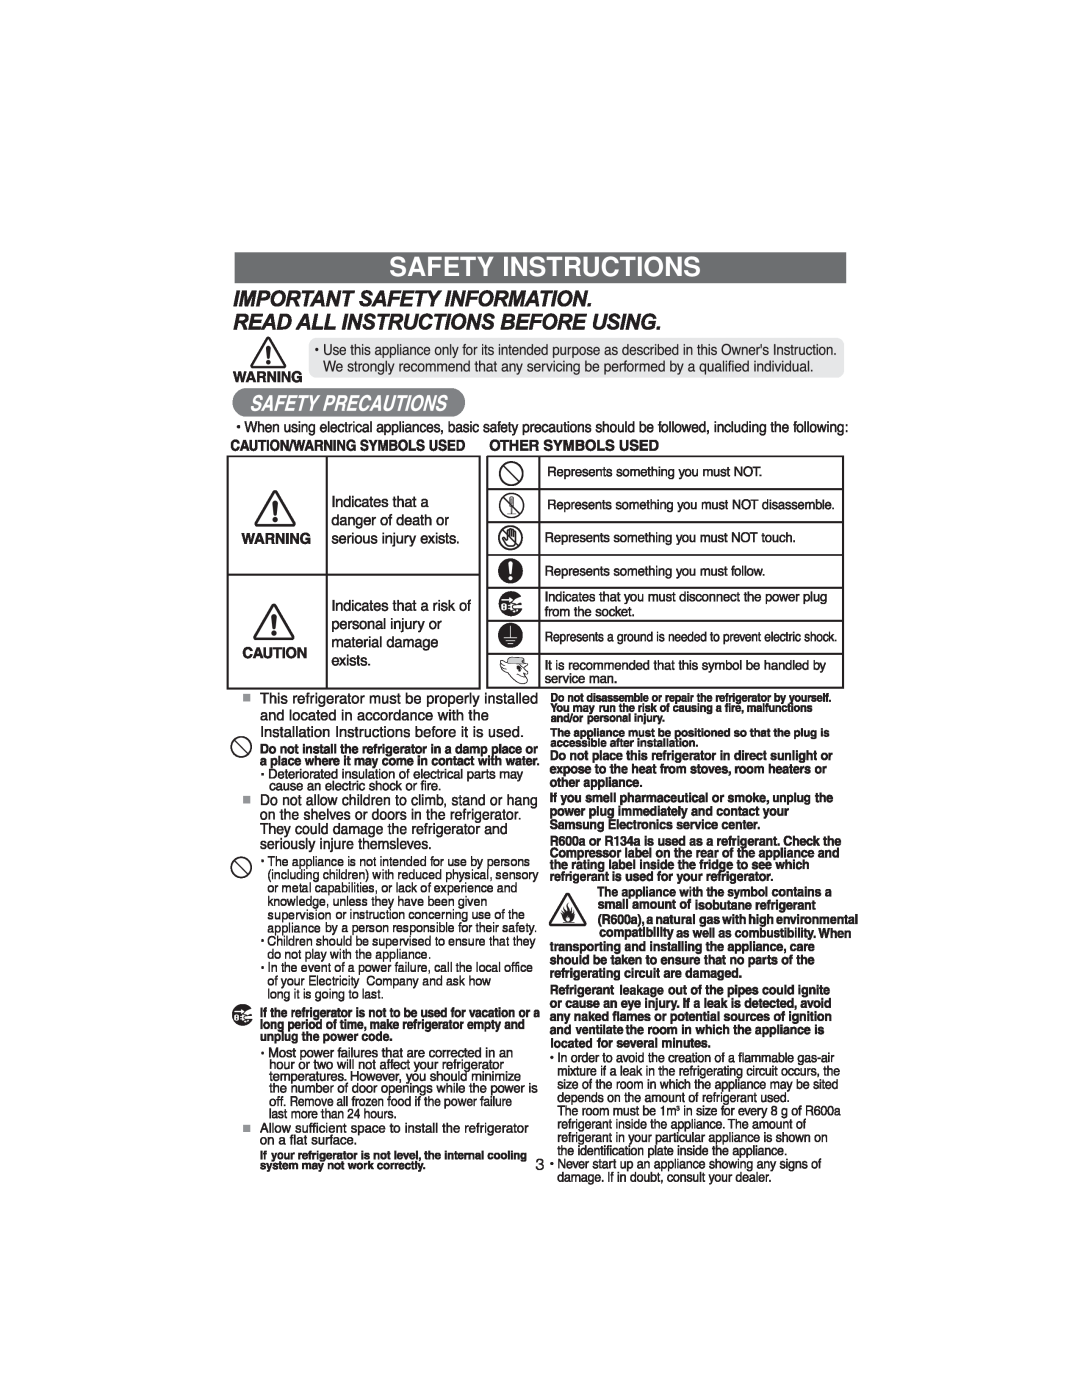 Samsung RT30S, RT37D, RT34G, RT37G, RT37S, RT30G, RT34S, RT34D, RT30D manual Safety Instructions, long it is going to last 